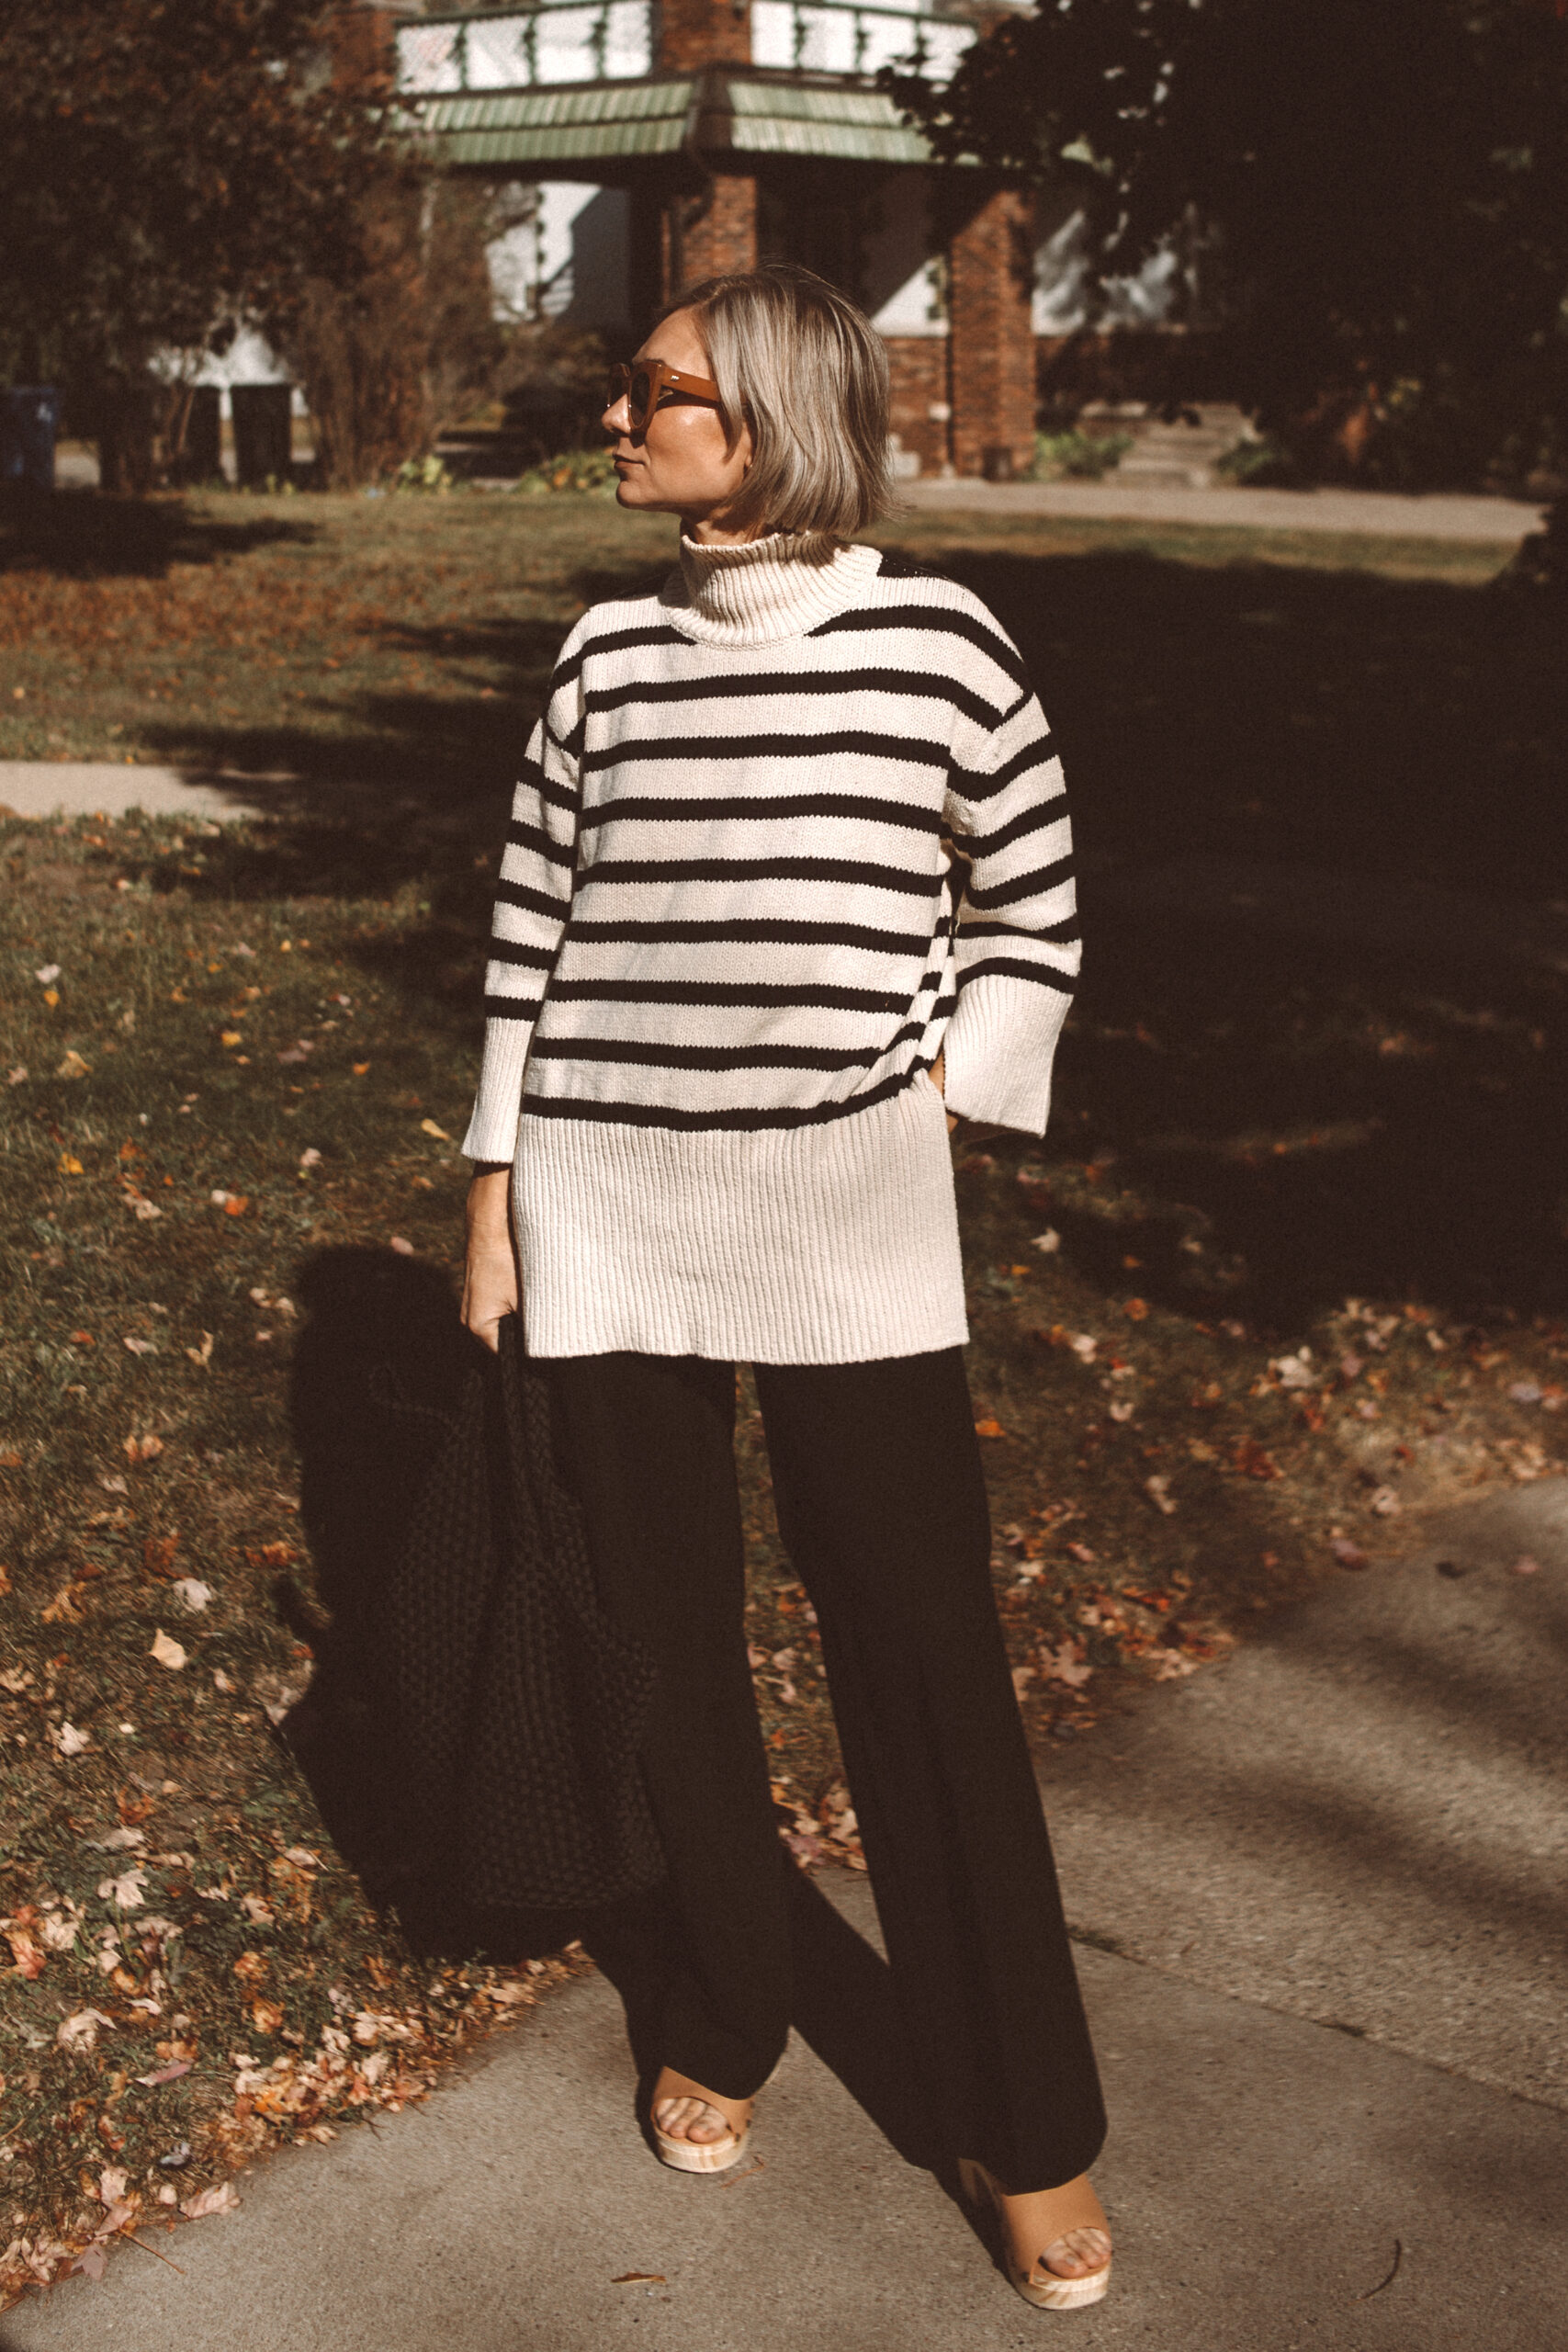 Karin Emily wears a pair of wooden blogs, striped turtleneck, black tote bag, and black wide leg pants